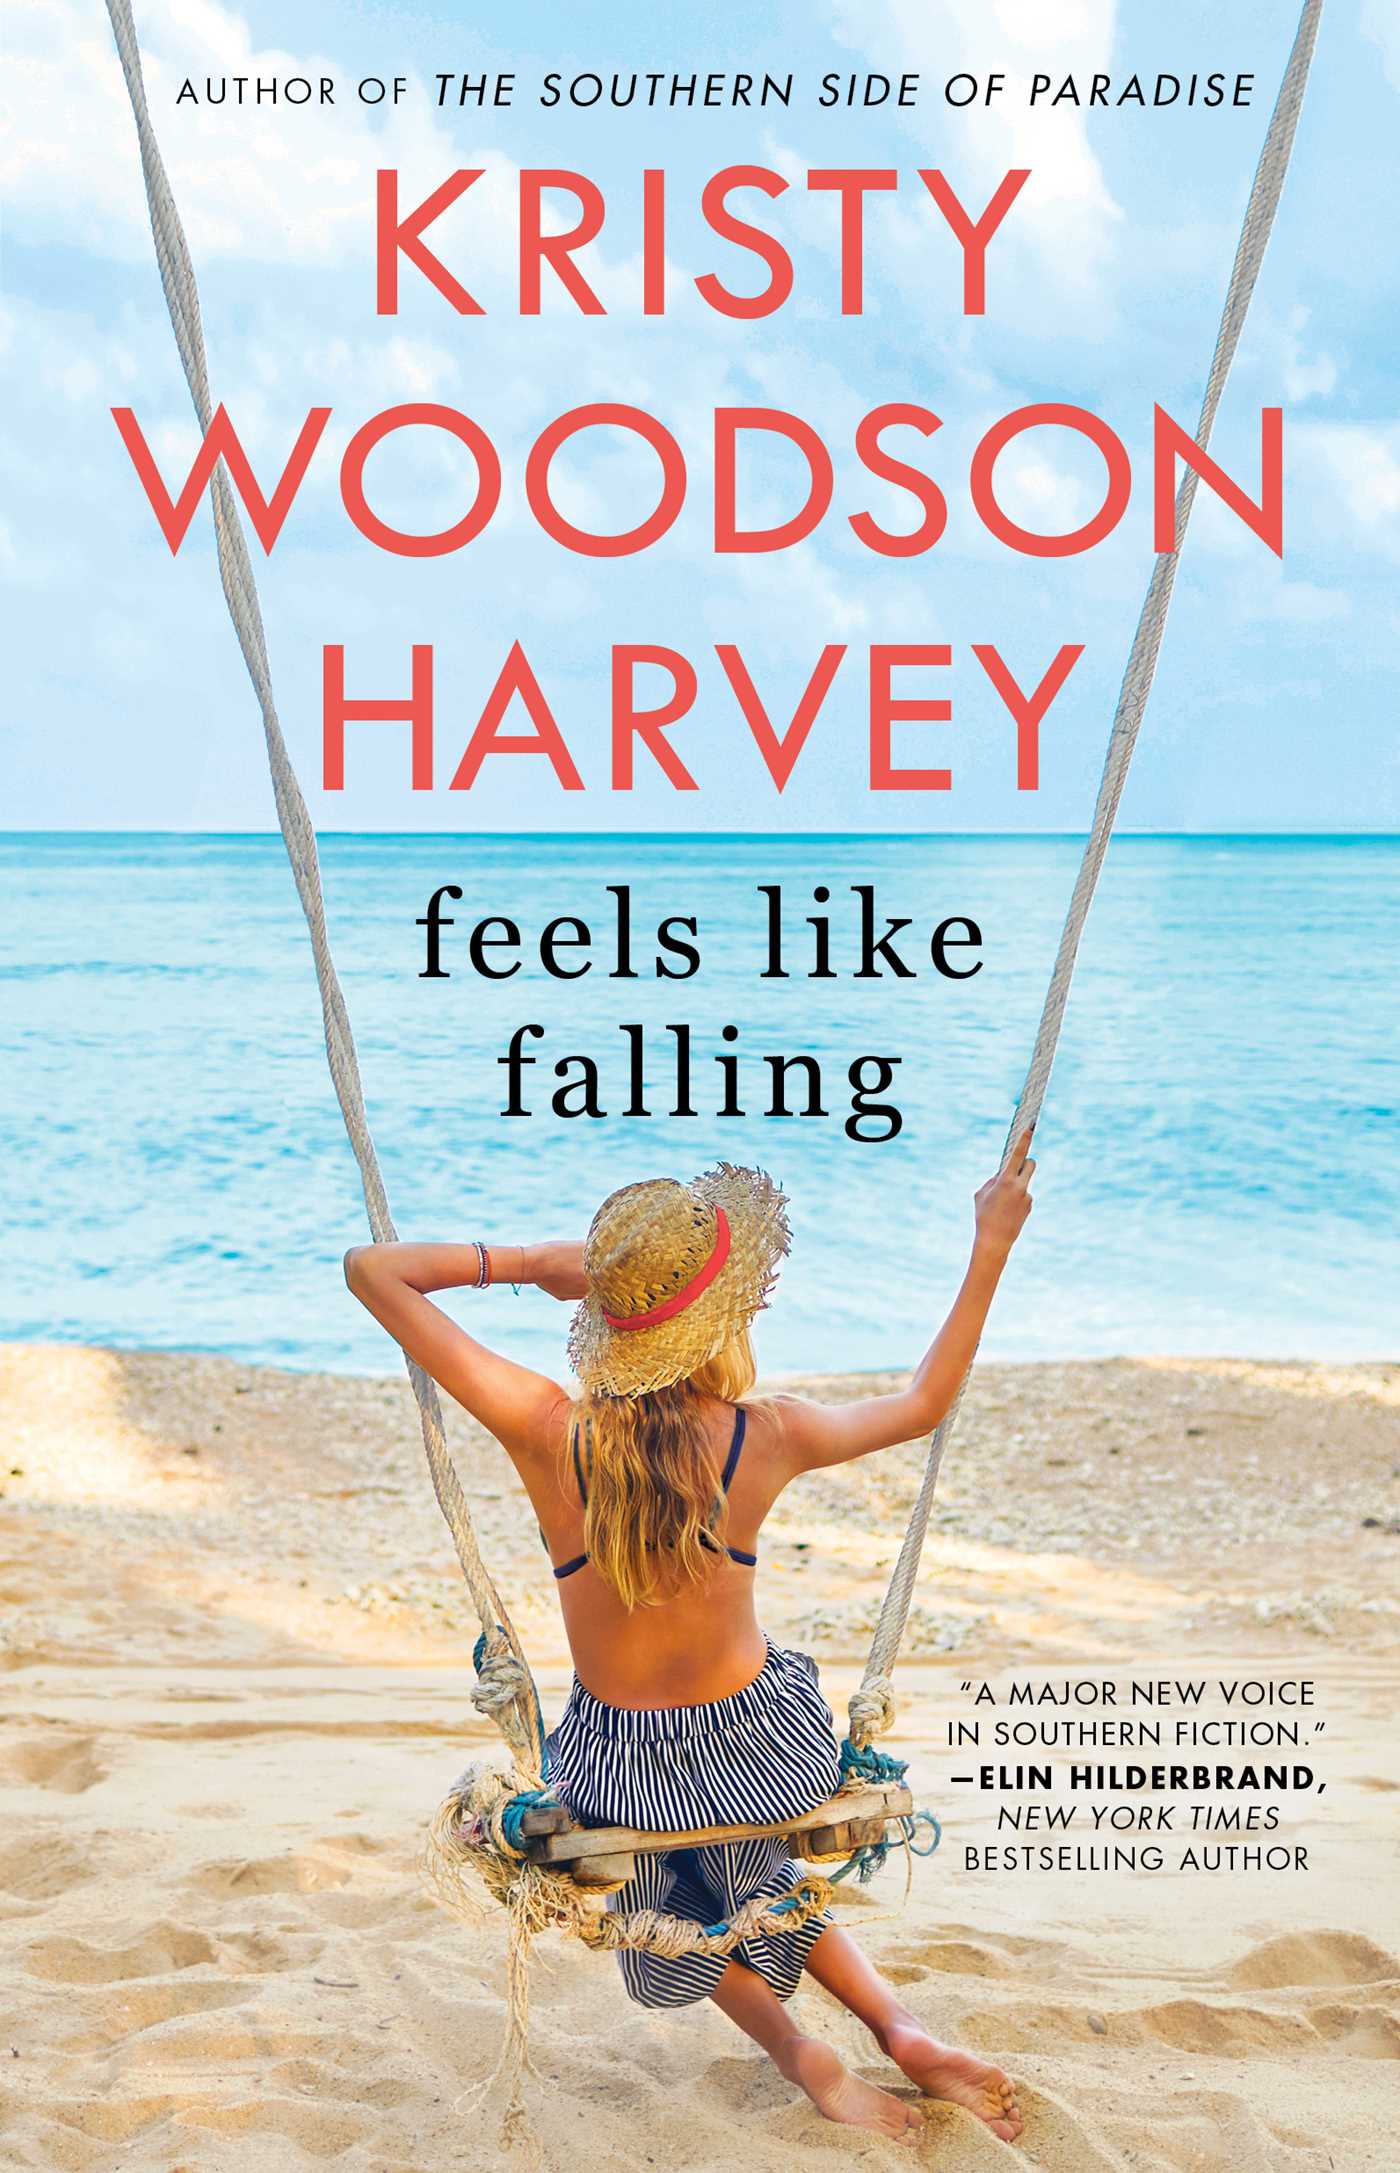 When Will Feels Like Falling Come Out? 2020 Women's Fiction Book Release Dates